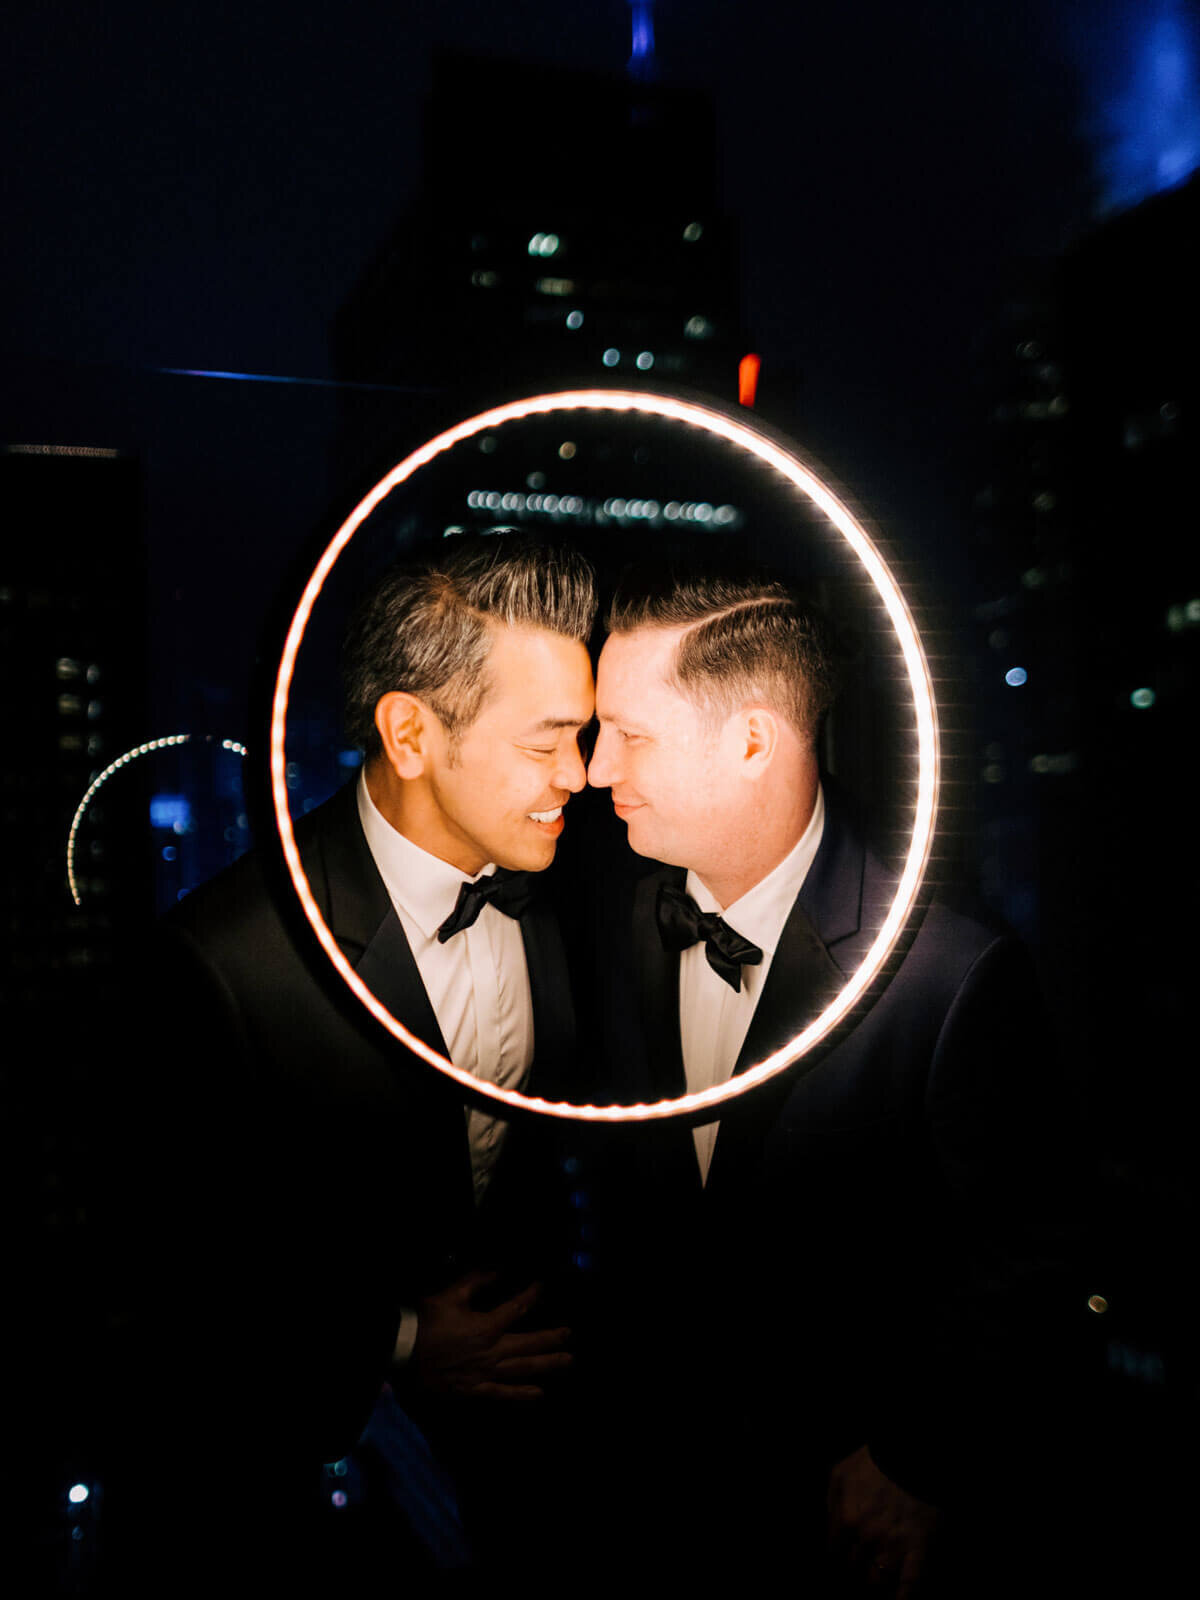 Headshot of the two grooms, heads touching, inside a ring light in The Skylark, New York. Wedding Image by Jenny Fu Studio